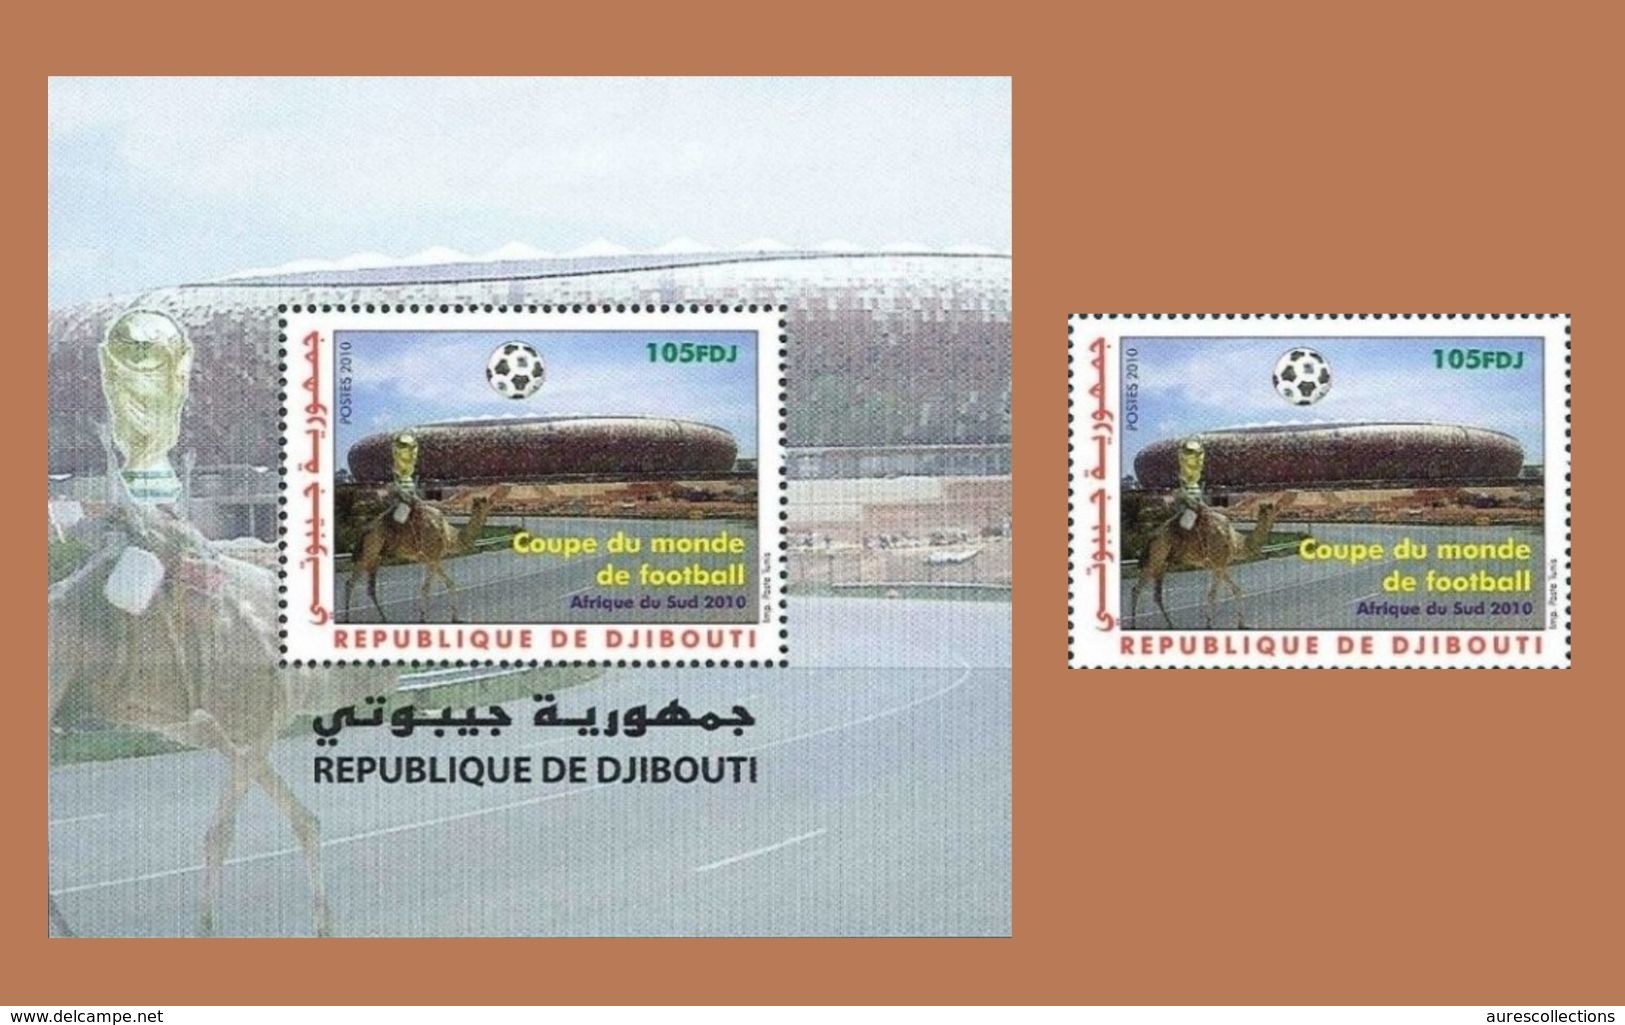 DJIBOUTI 2010 - SOUTH AFRICA SOCCER WORLD CUP FUSSBALL WELTMEISTERSCHAFT COUPE BLOC S/S SHEET + 1 VAL ULTRA RARE  MNH ** - 2010 – África Del Sur